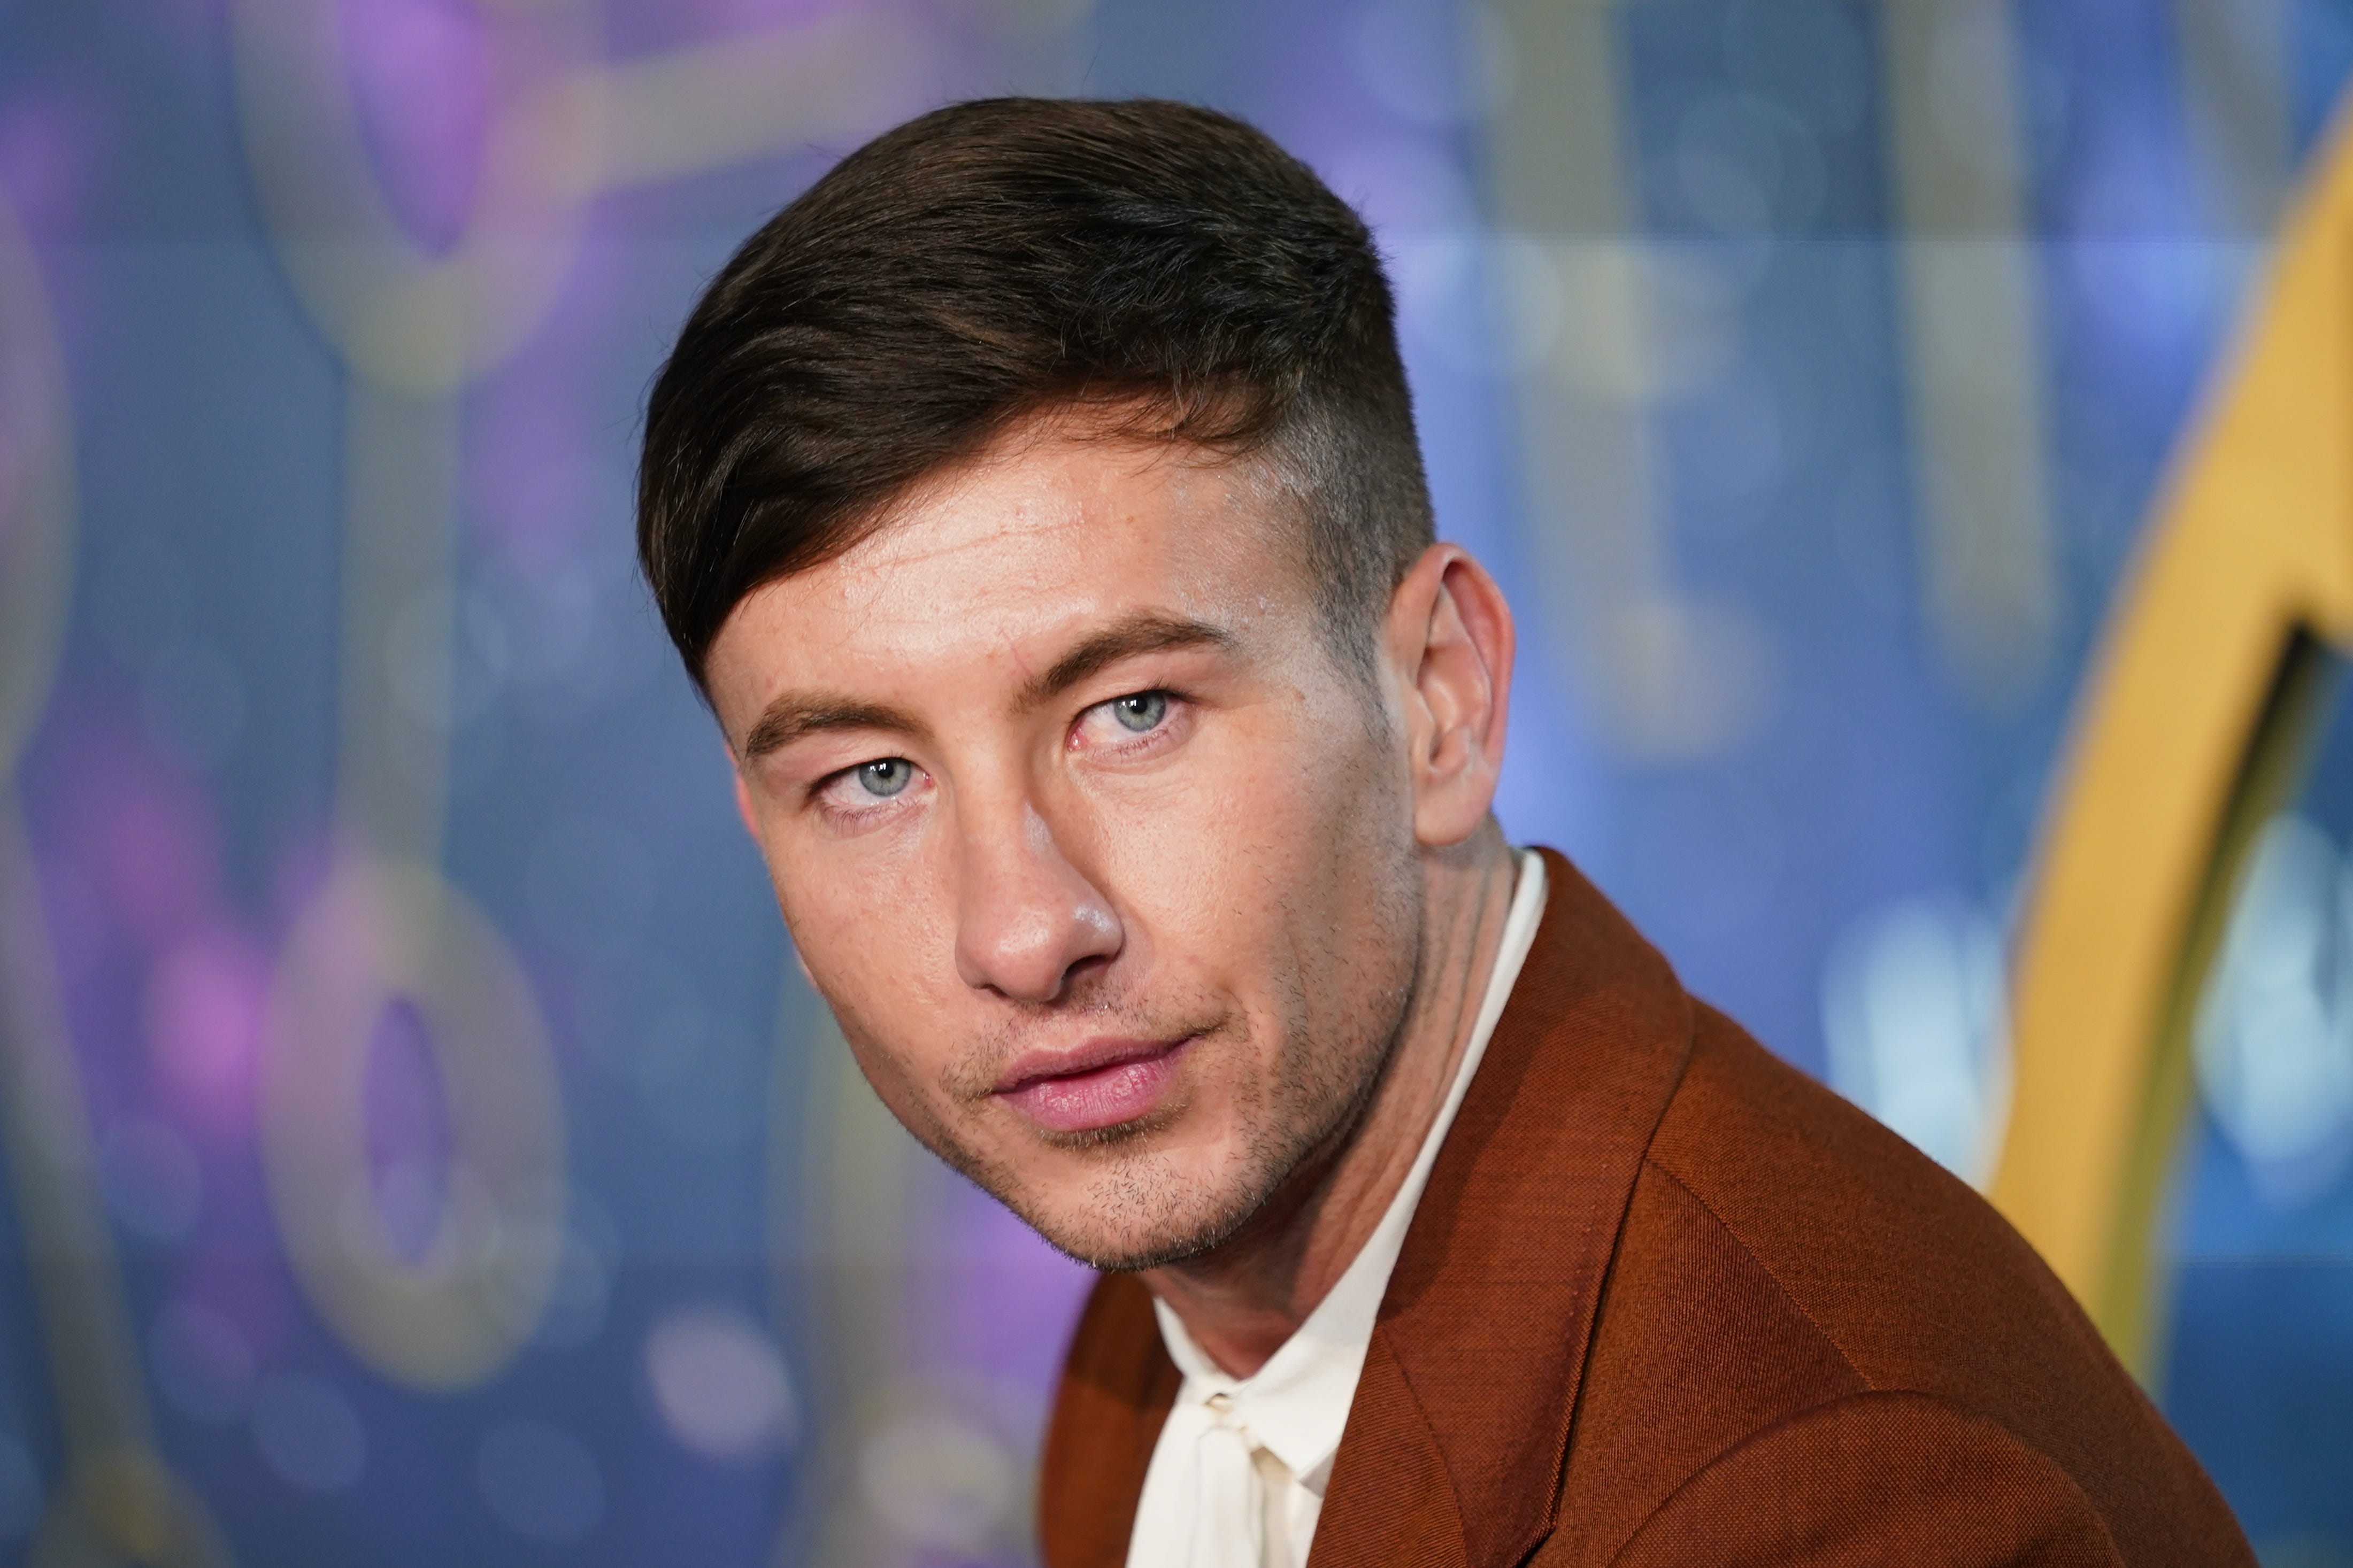 Care leavers hail 'inspirational' Barry Keoghan as he aims for Oscar glory | The Independent